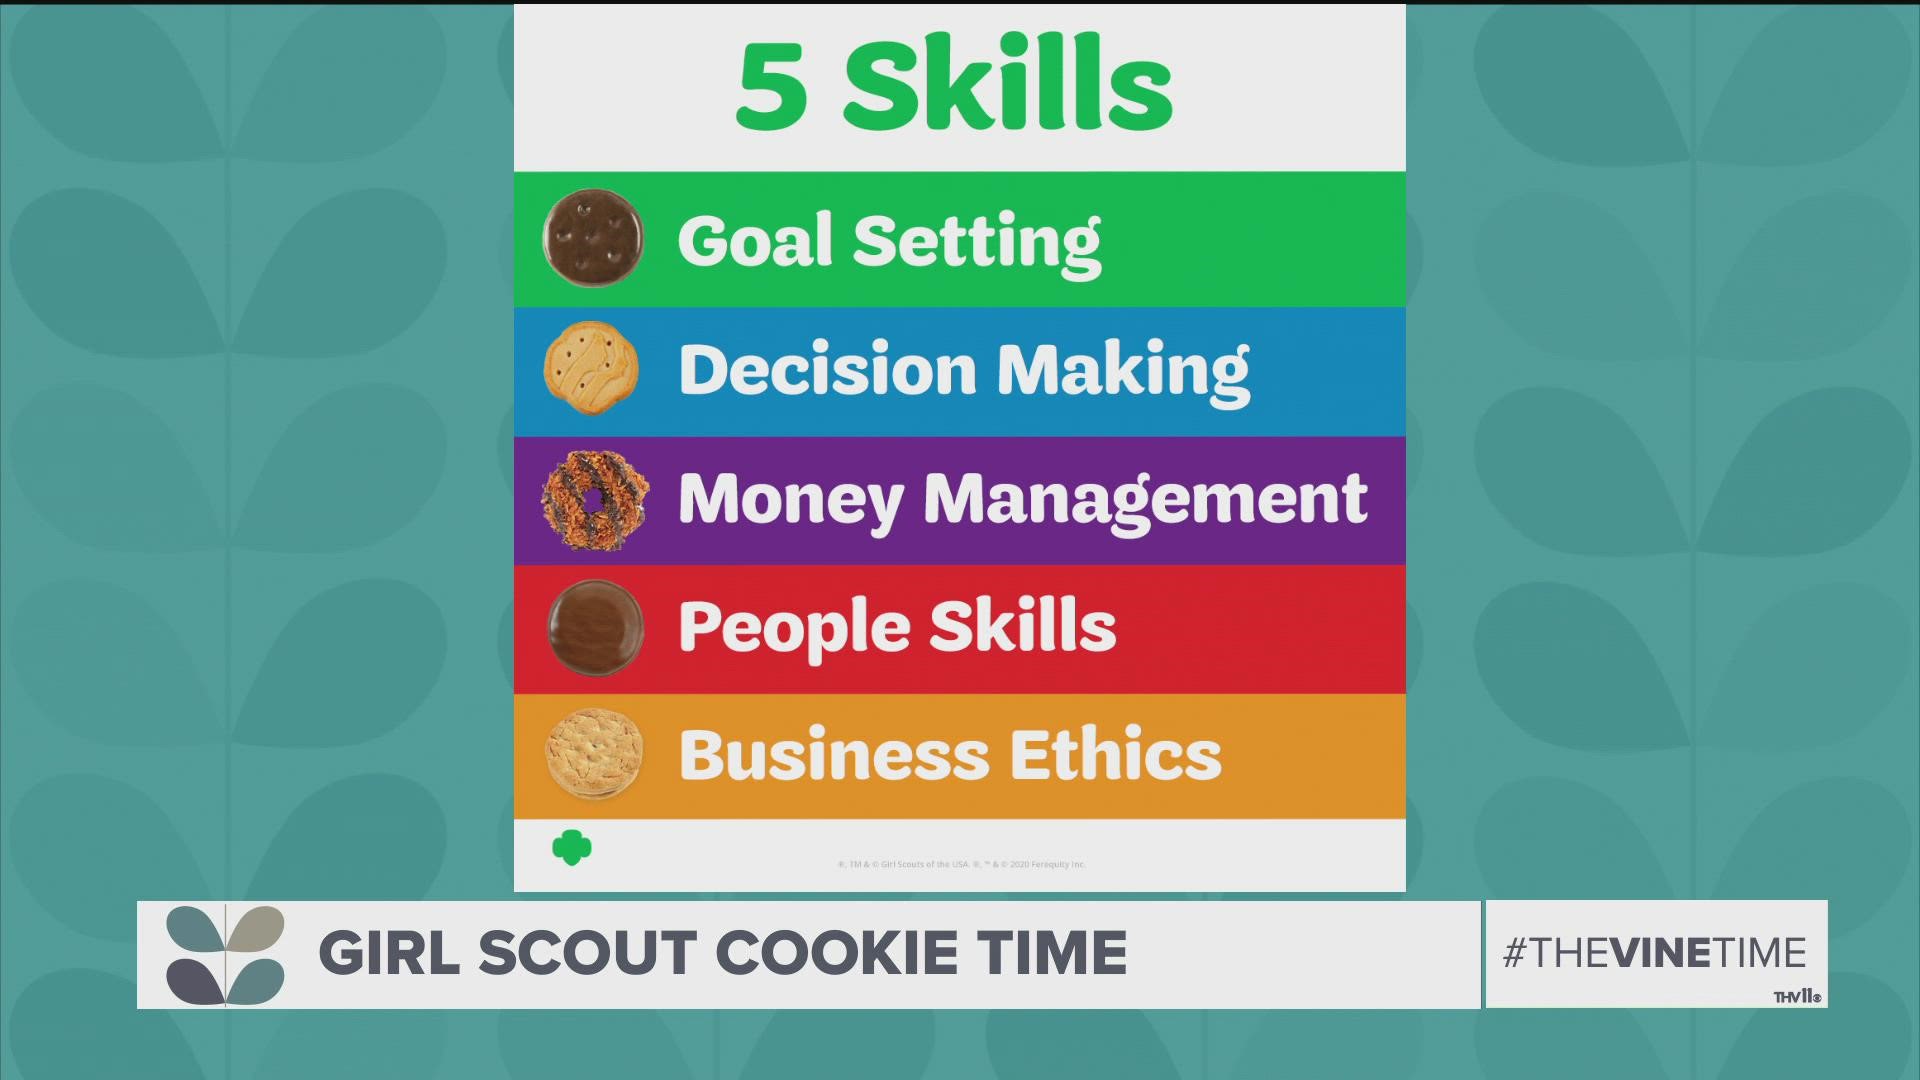 Buying a box of Thin Mints does more than you might think. Girl Scouts learn how to set goals, manage money and talk to people through selling cookies.